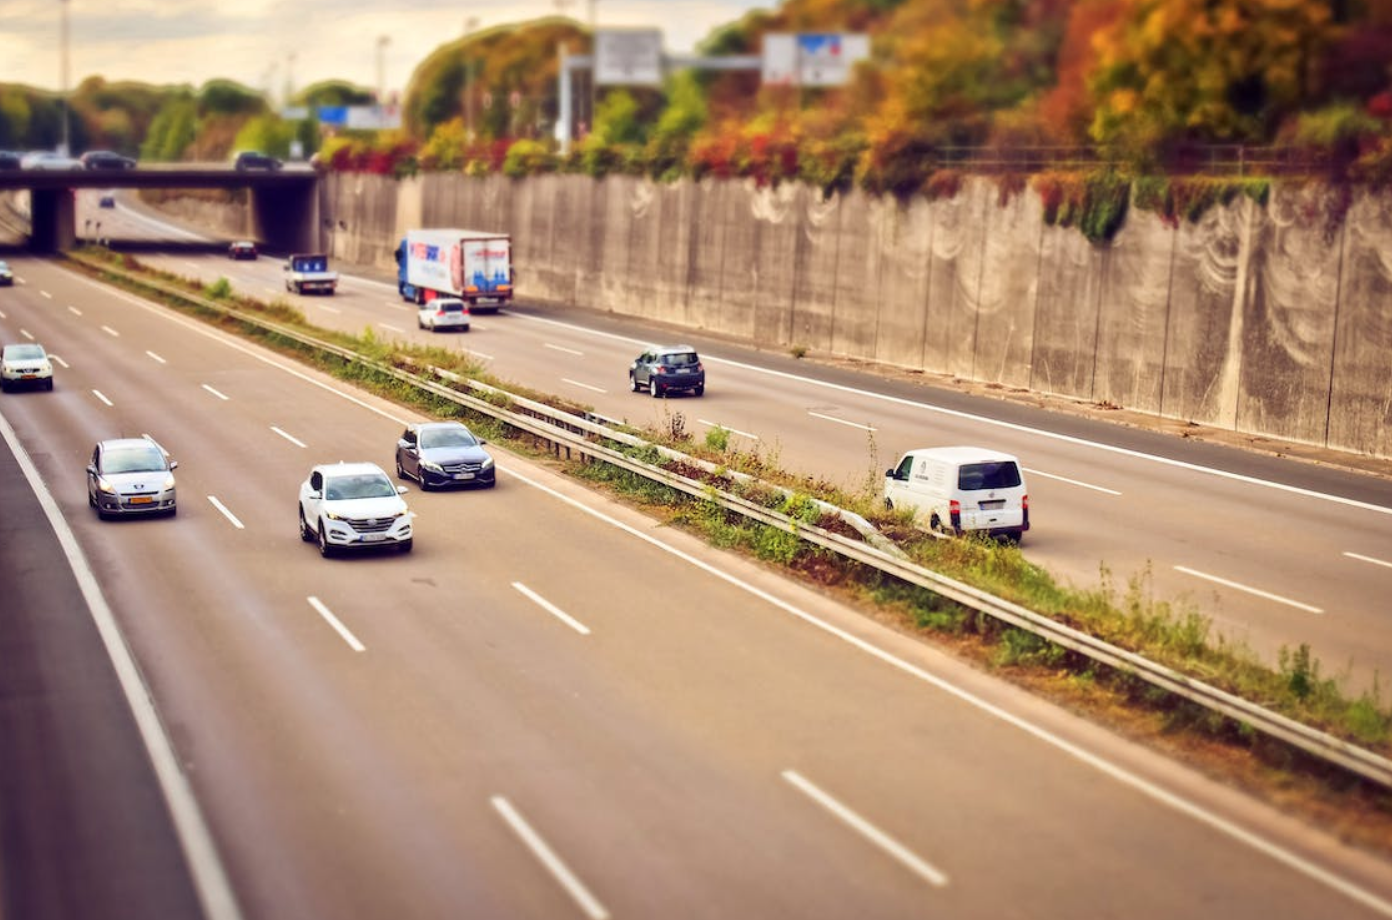 Cars on the road; image by Pixabay on Pexels.com.